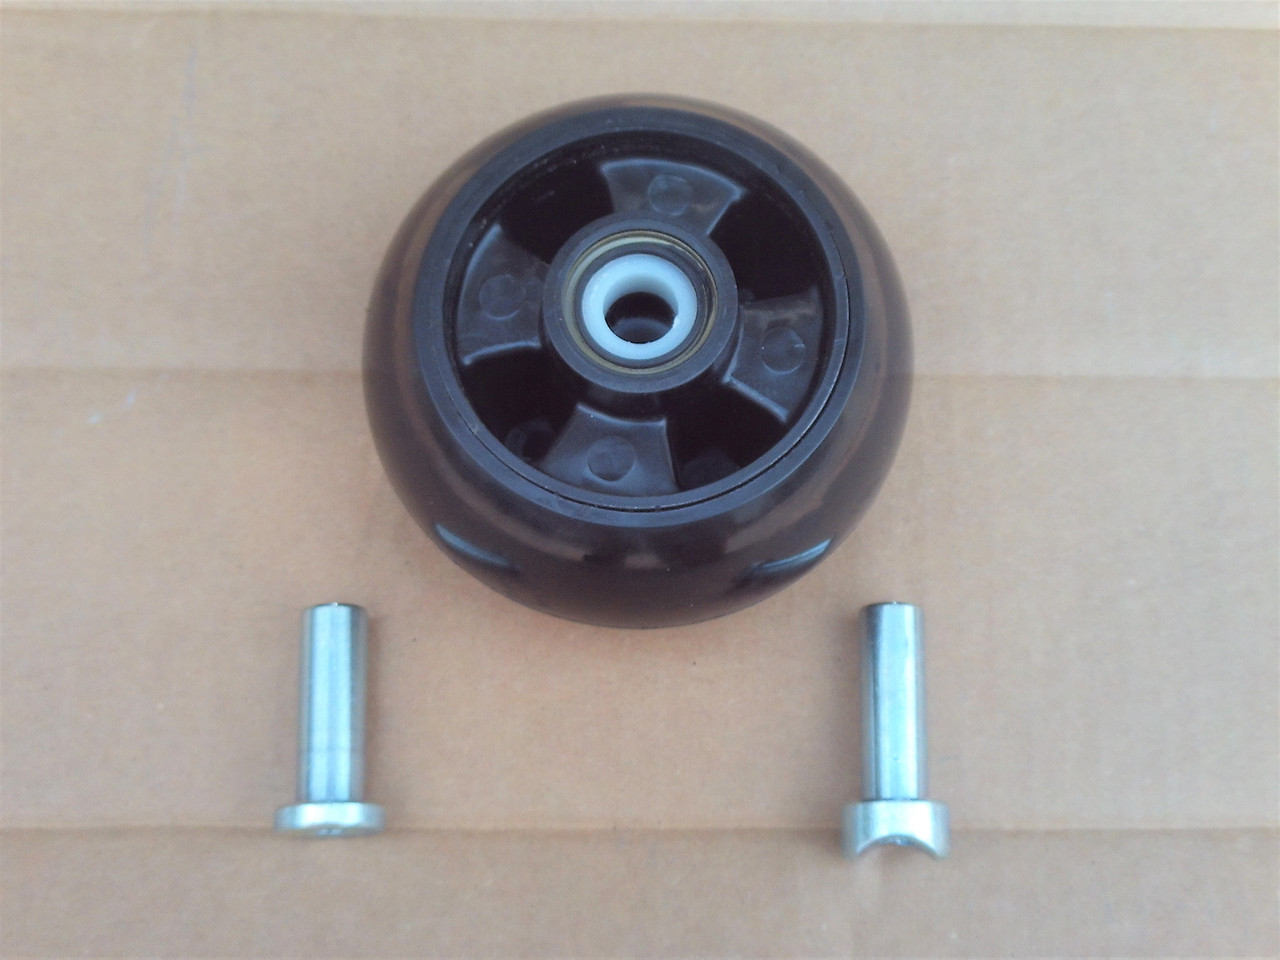 Deck Wheel Kit for John Deere 240 245 260 265 285 320 325 335 345 355D 2025R 2210 4010 4100 4110 4115 4200 4210 4300 4310 4400 4410 4500 4510 4600 4610 4700 ZTrak AM125172 Includes bushings and grease fitting